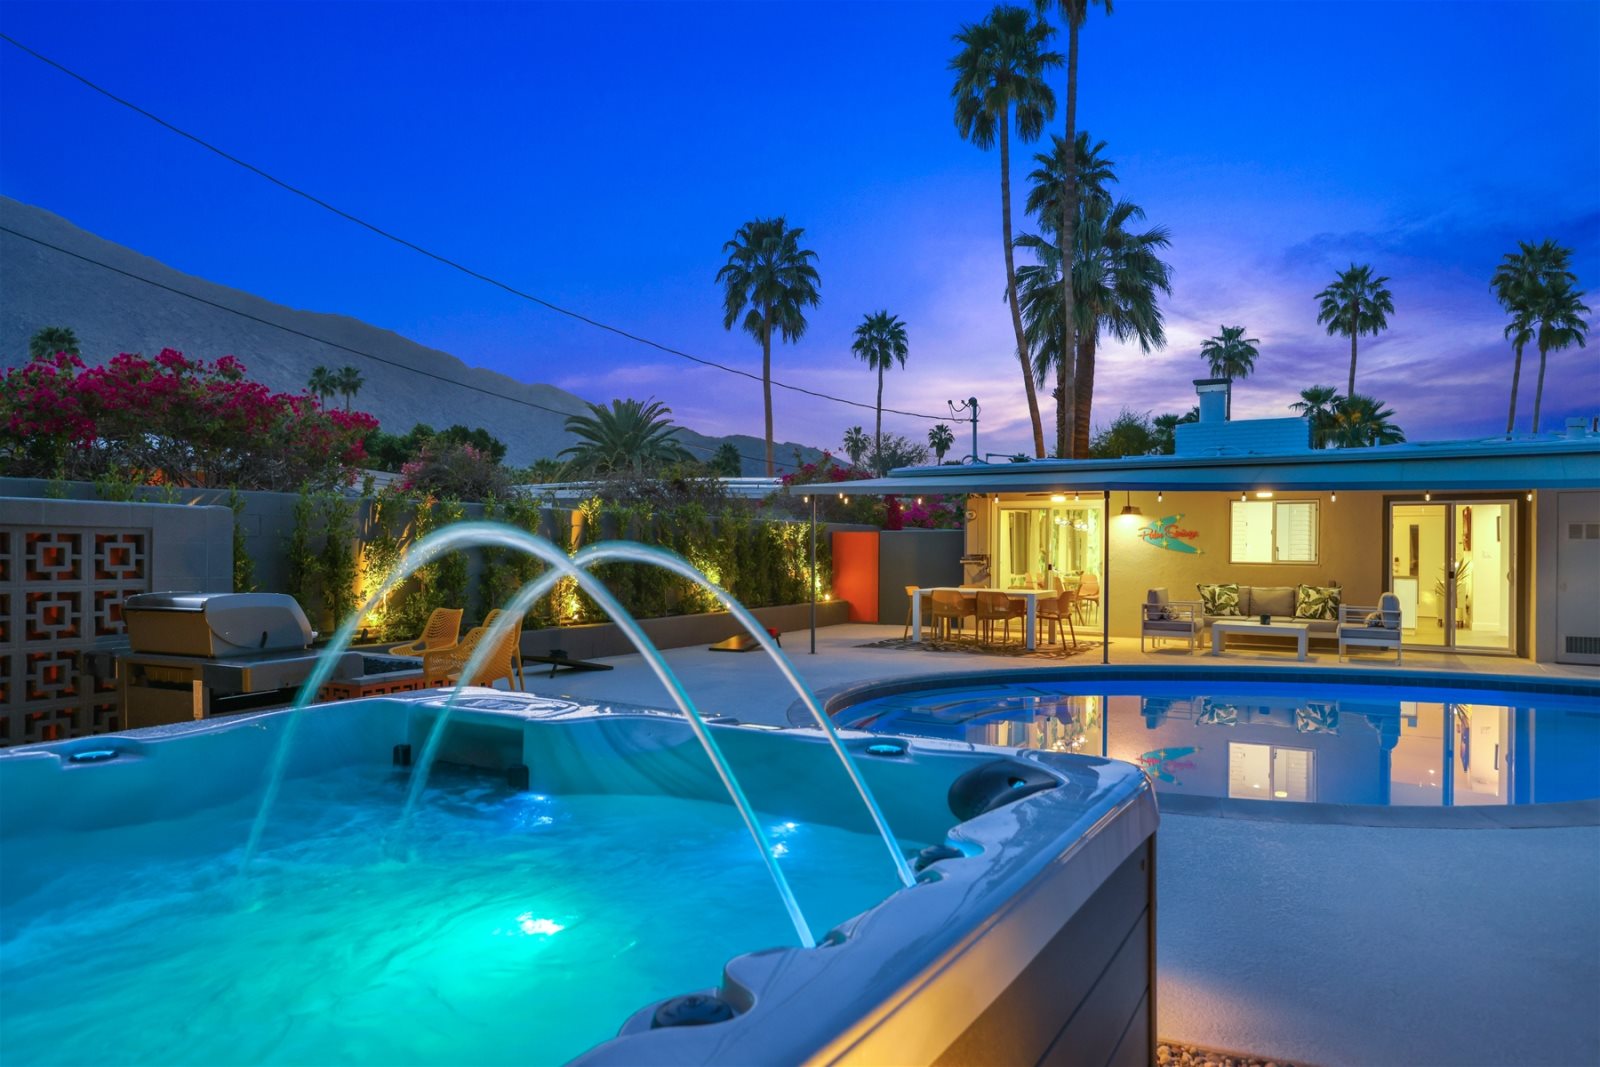 Palm Springs Vacation Rental Pool Home - Palm Springs Sun and Fun